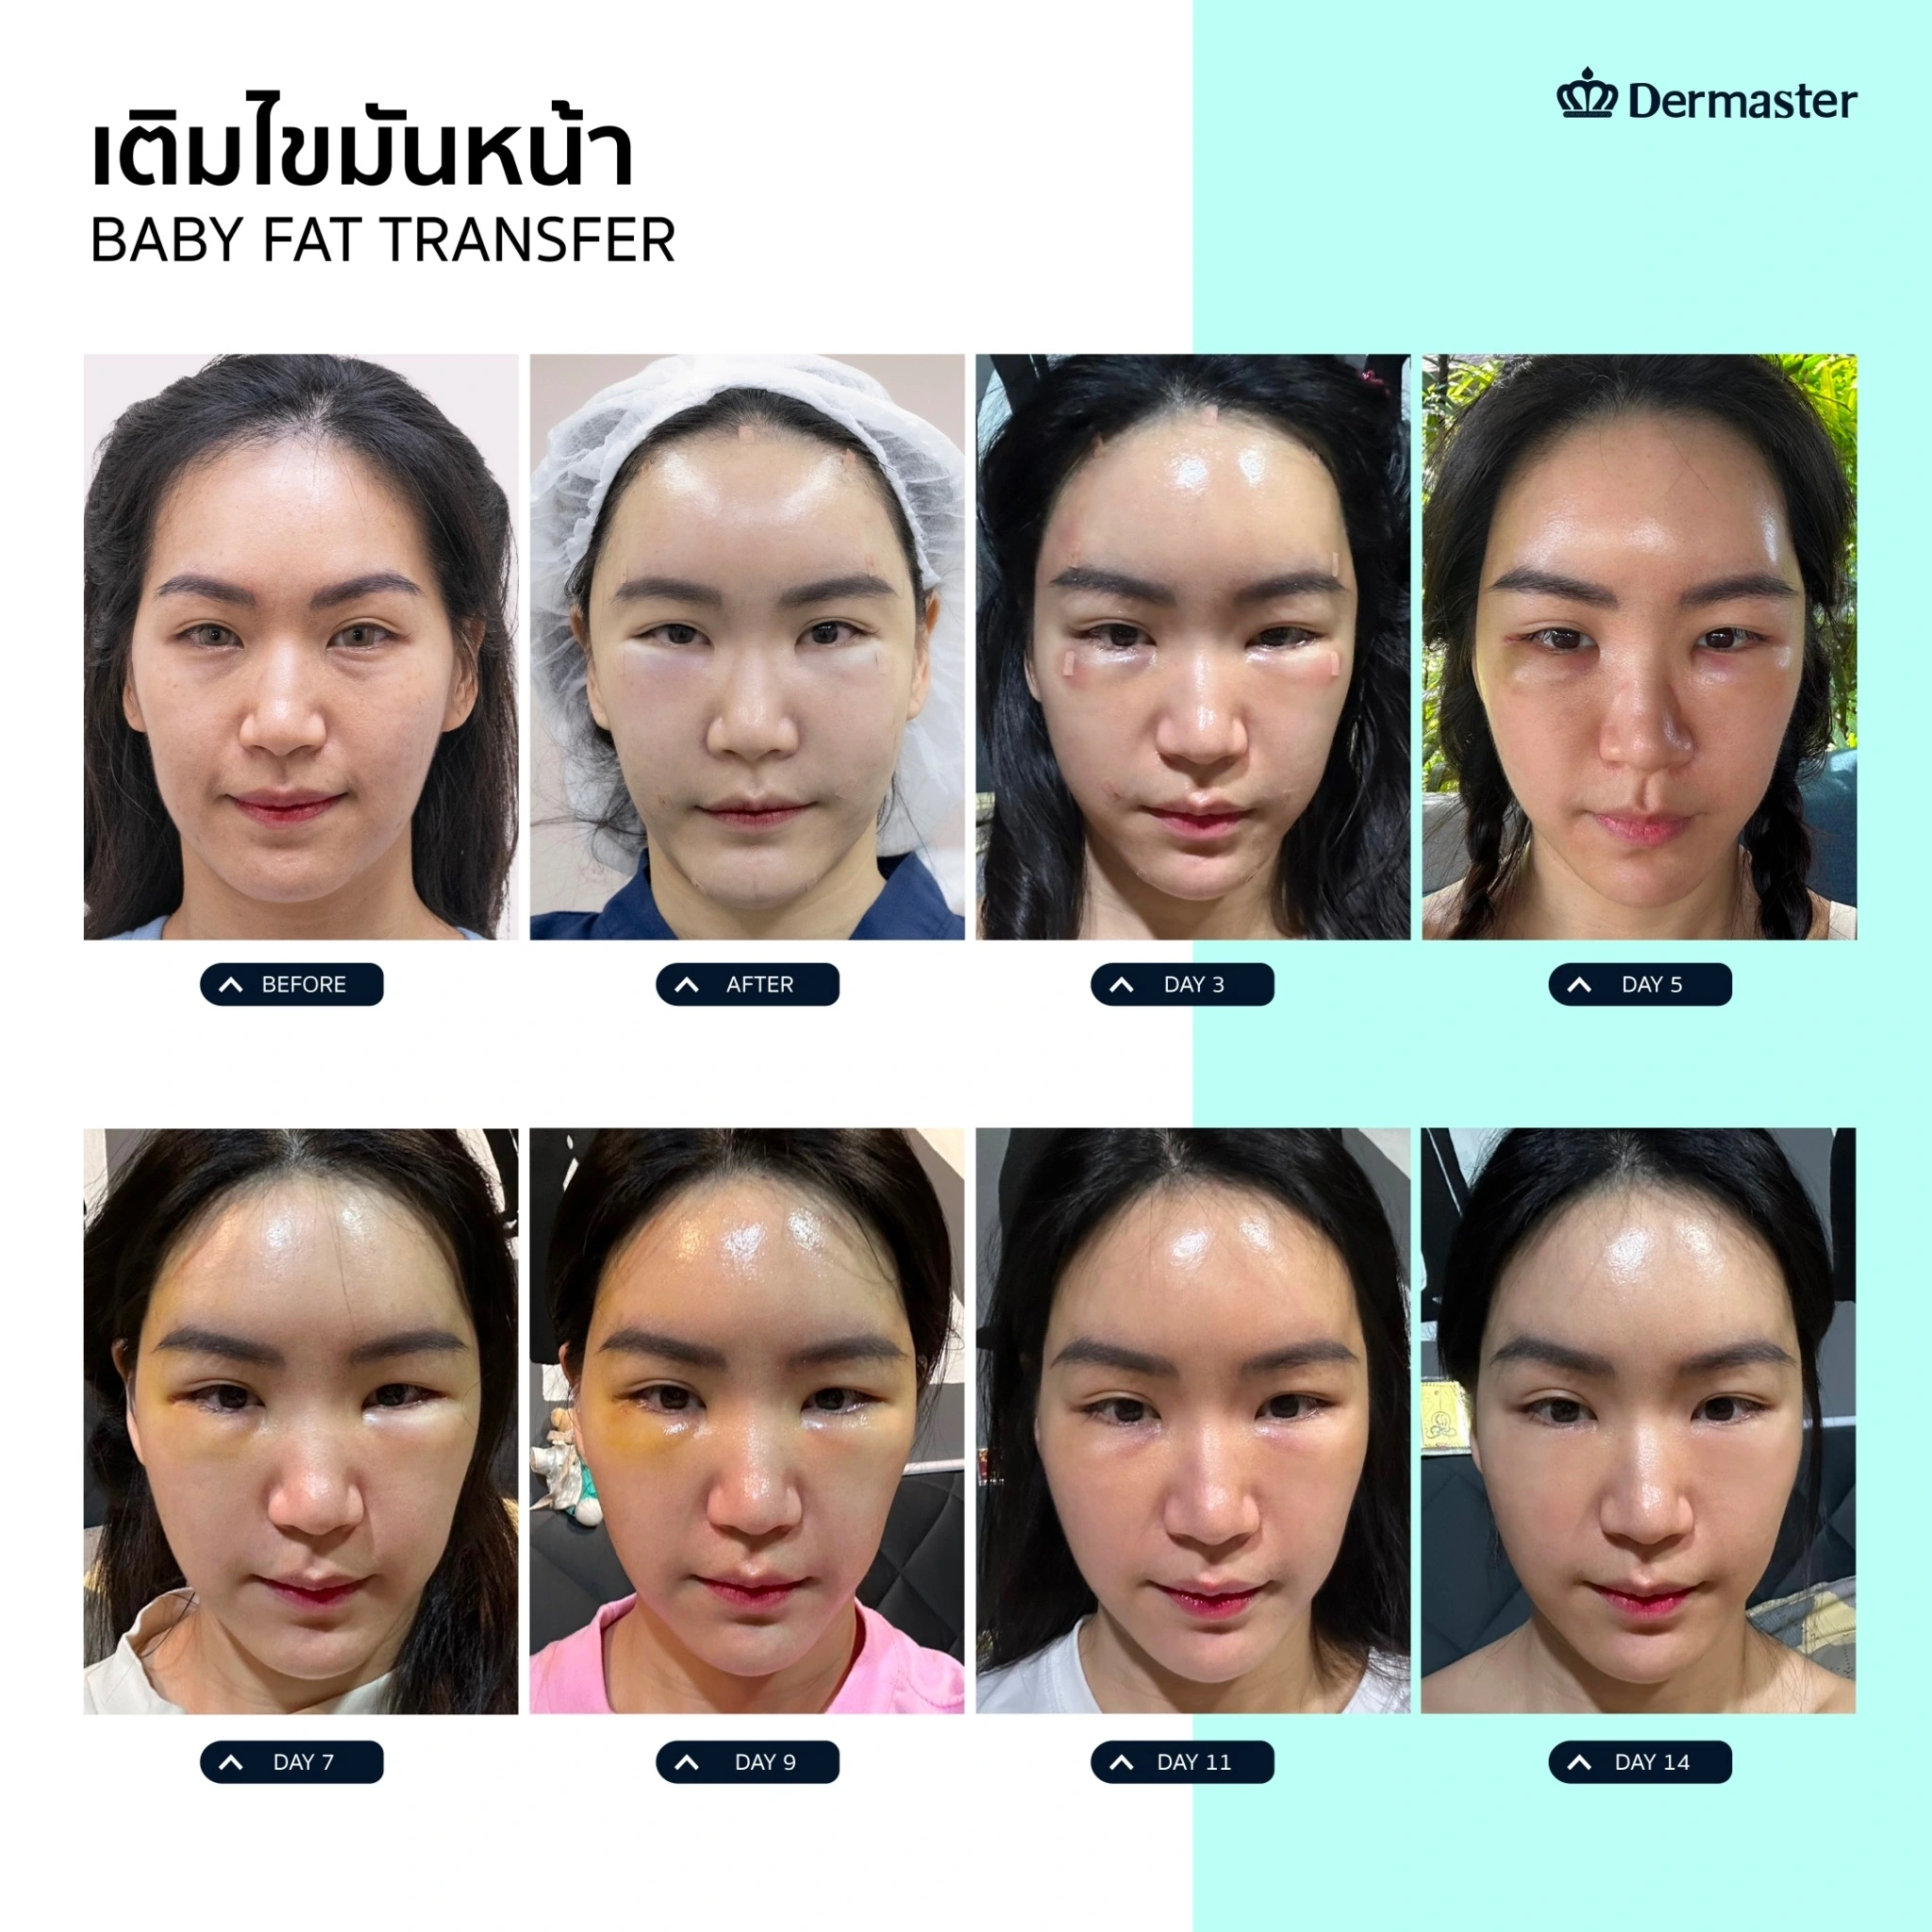 dermaster-thailand-baby-fat-transfer-before-and-after-14-days